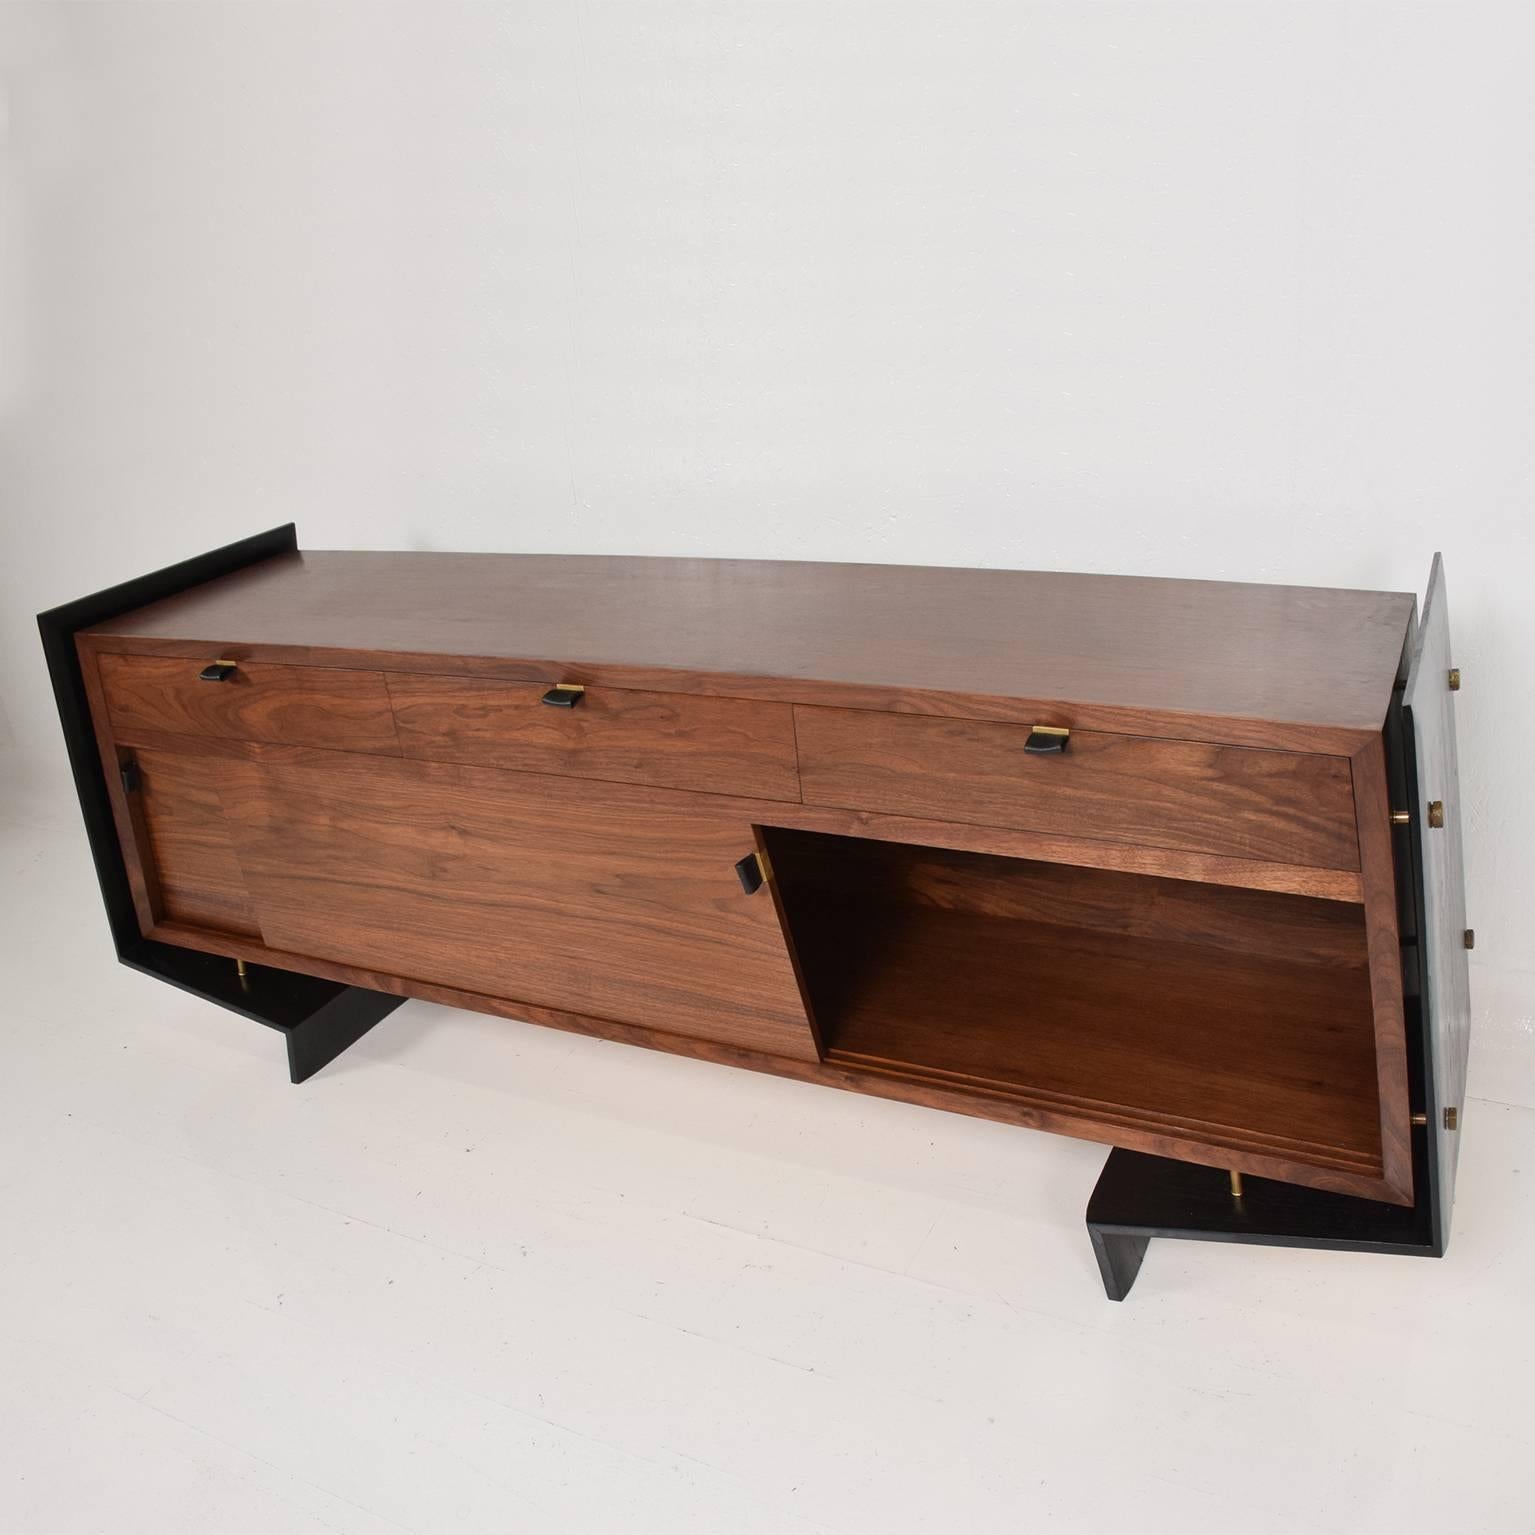 For your consideration a high-quality one of a kind floating credenza handmade in California.
Designed by Pablo Romo.
Measures: 84 1/2